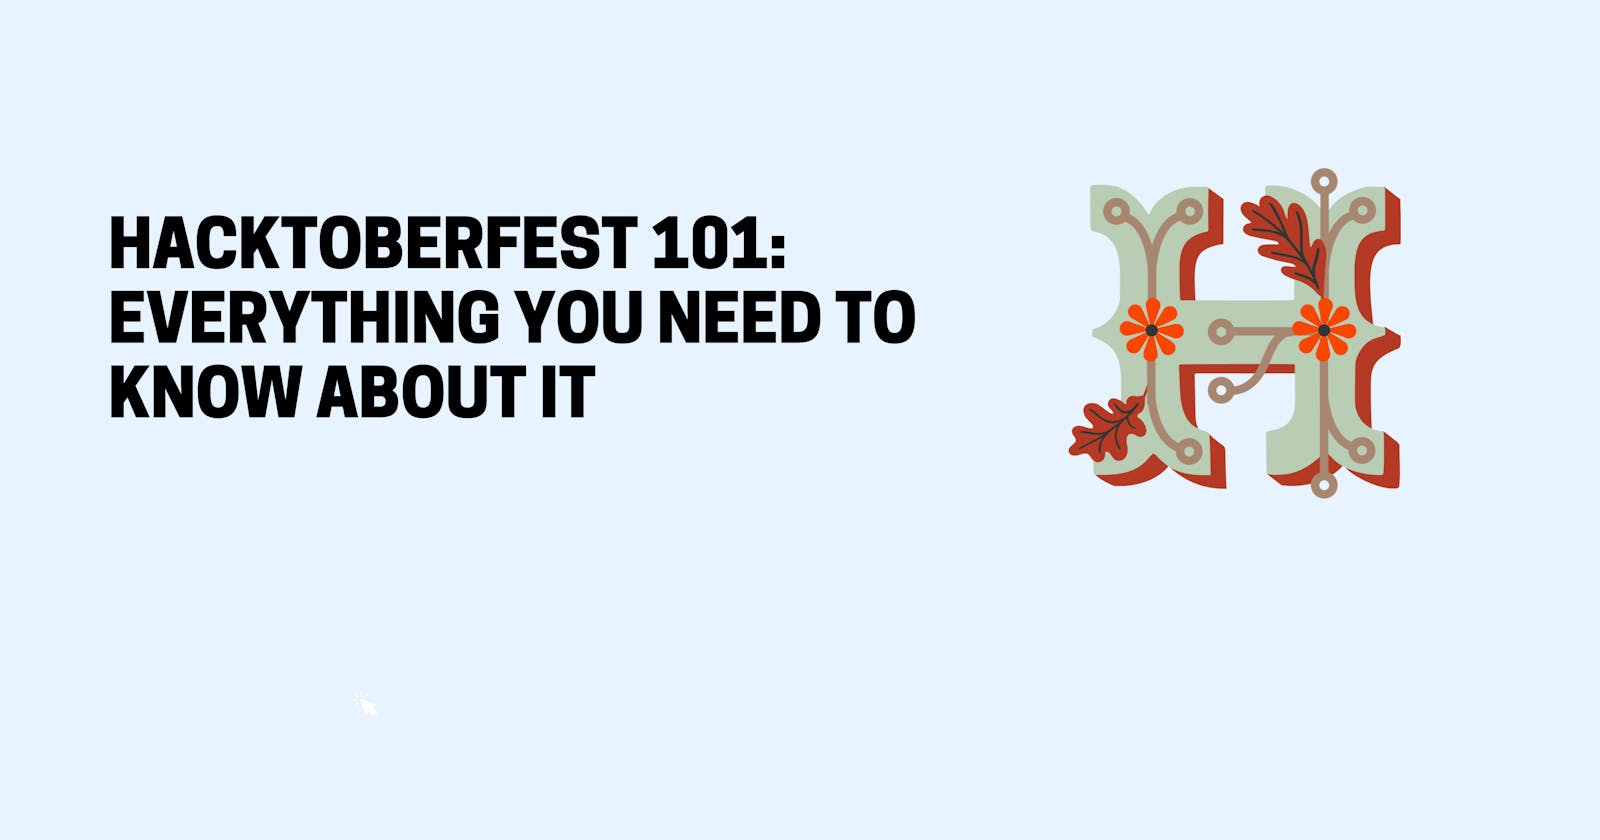 Hacktoberfest 101: Everything You Need To Know About It